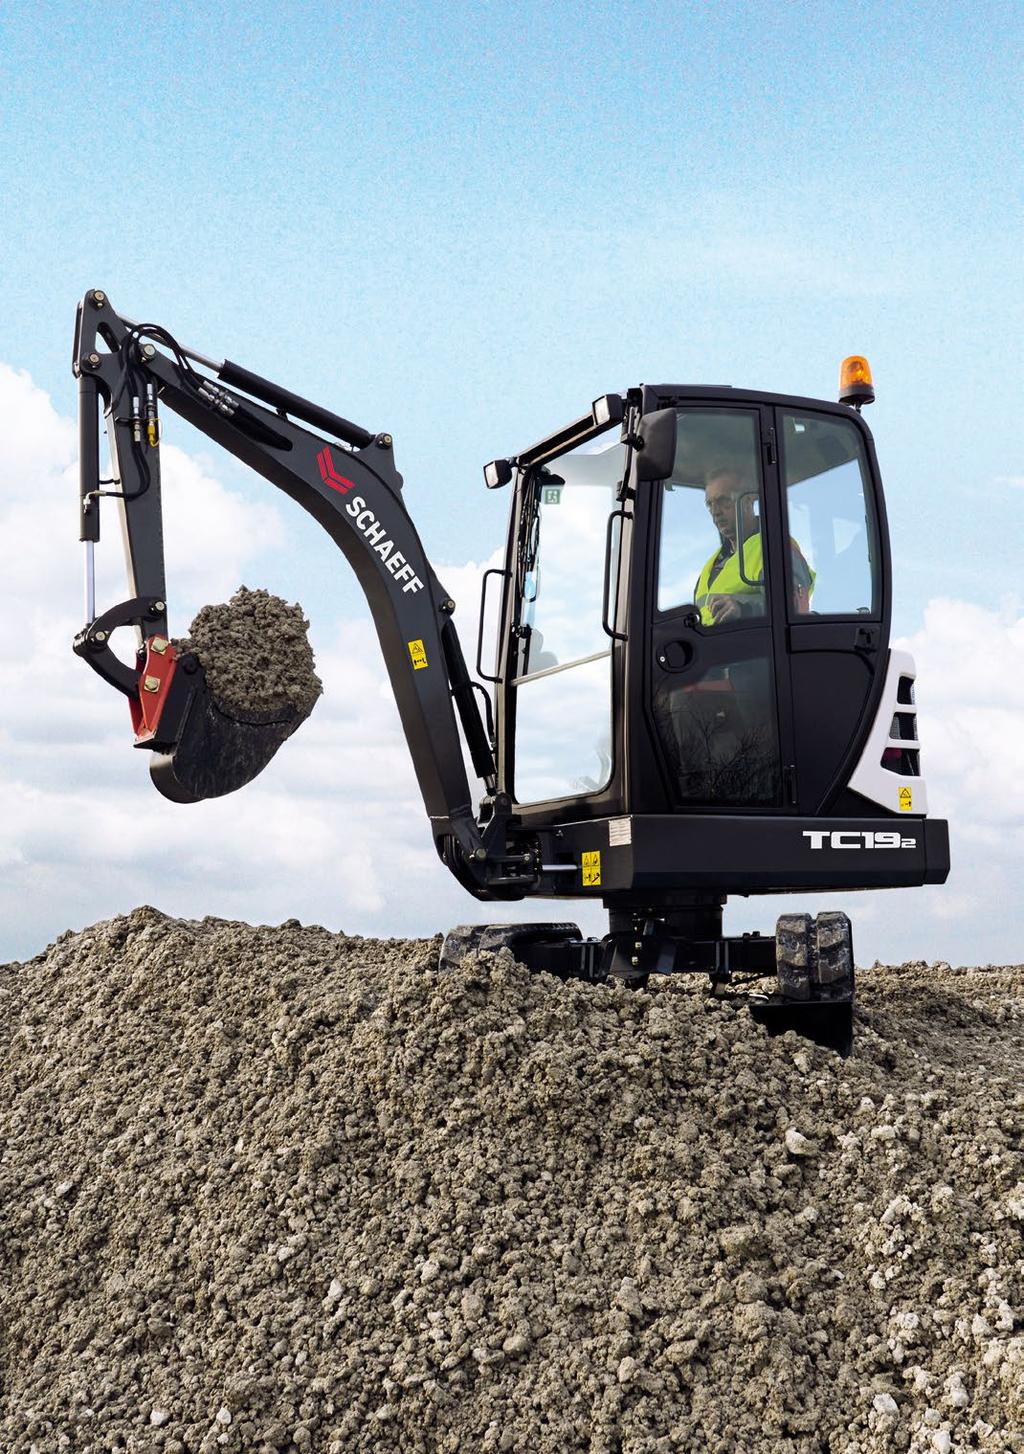 MINI EXCAVATOR WHAT DOES A GOOD MINI EXCAVATOR MEAN TODAY? Very simple: the ability to reliably do more.